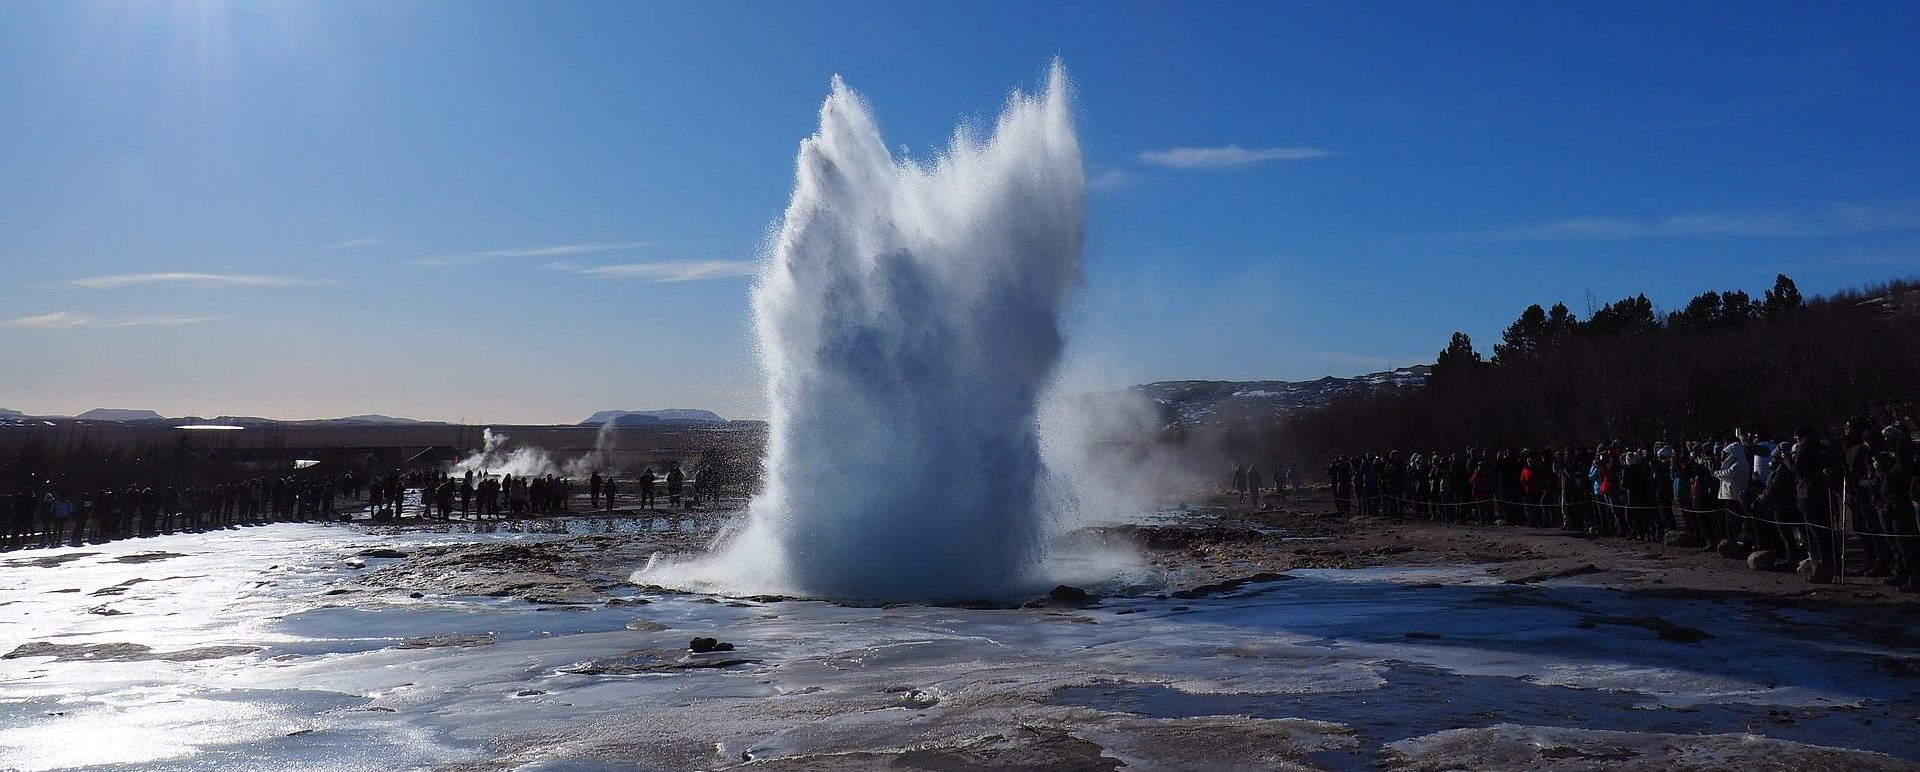 A geyser erupts similar to the DTC personal health and wellness industry.